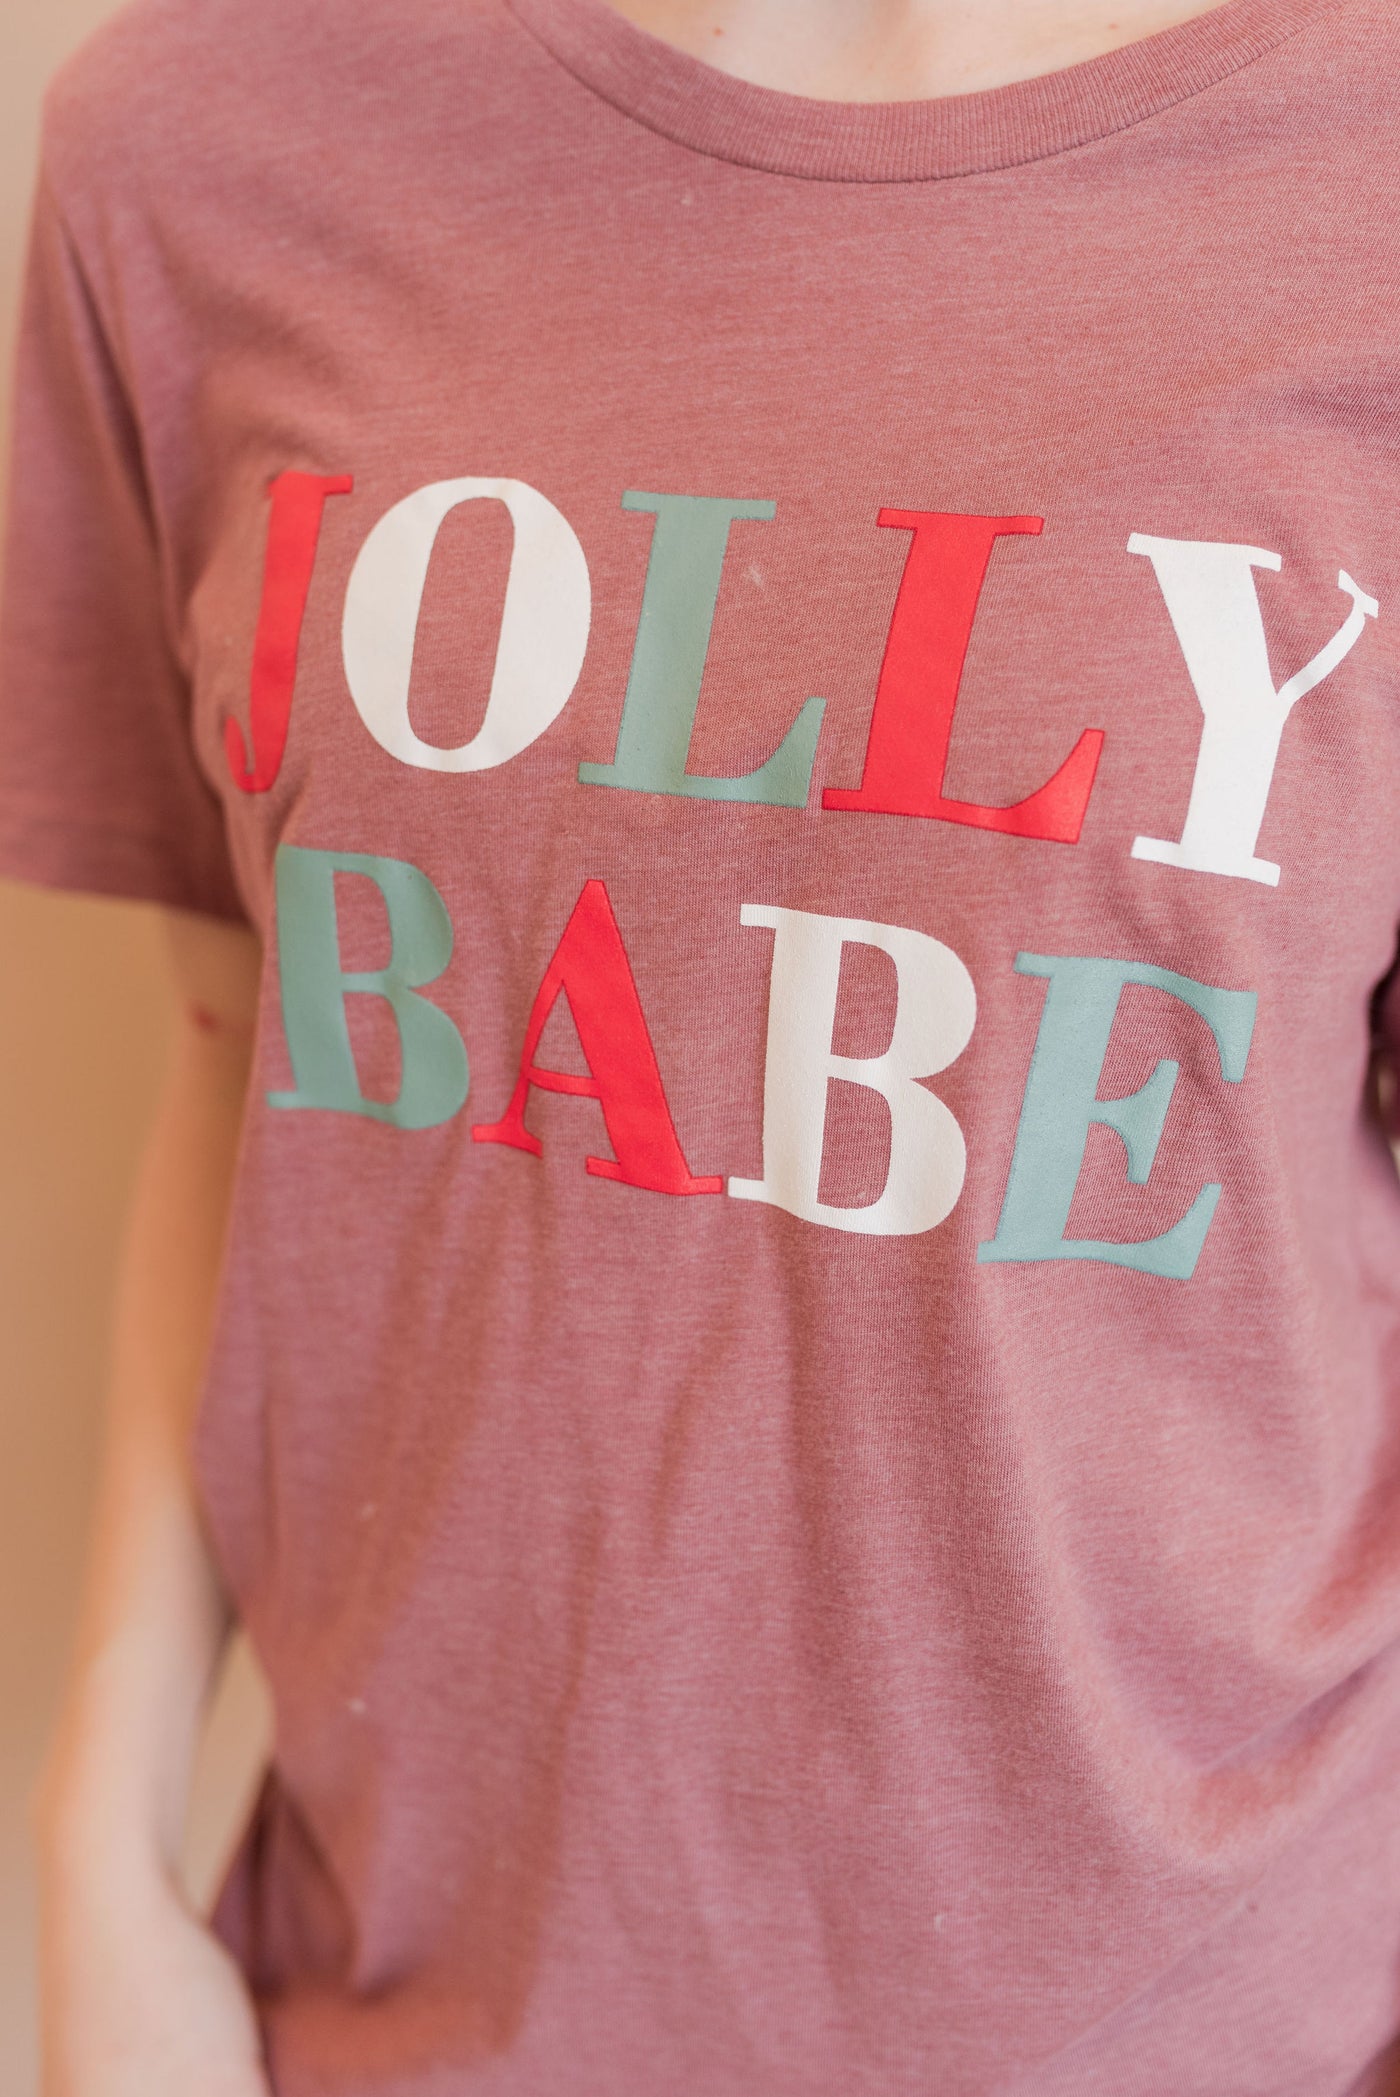 Jolly Babe Graphic Tee - Poppy and Stella